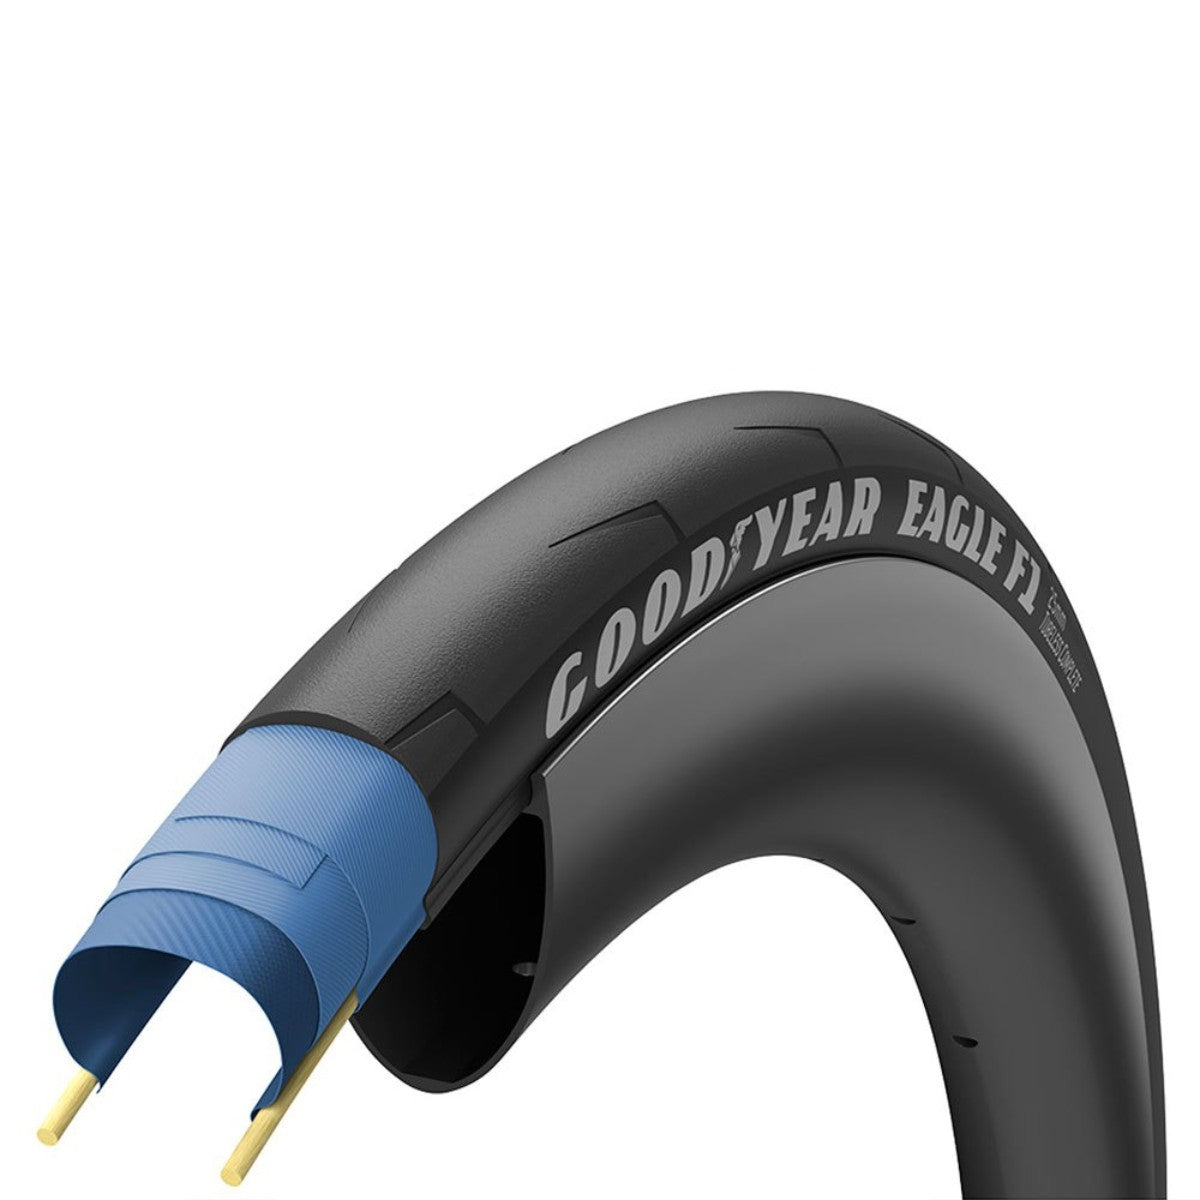 Good Year Eagle F1 Tubeless Complete clincher